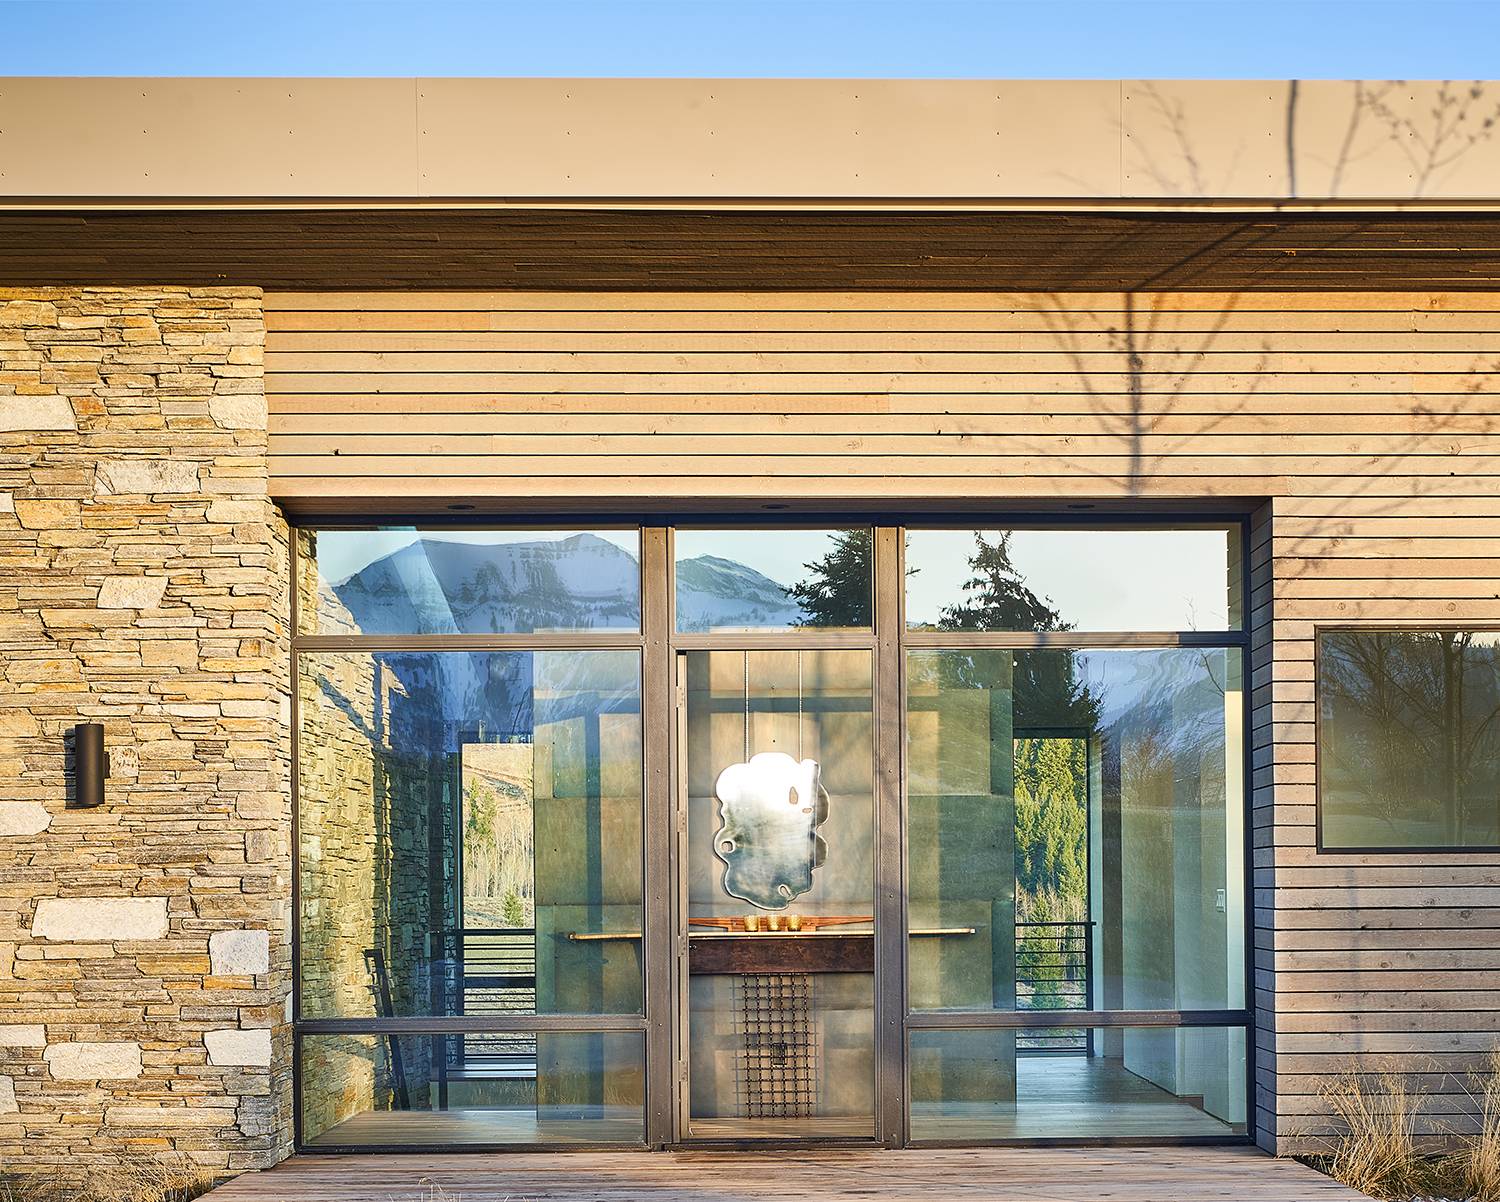 Exterior view of the main entry at Gros Ventre West, a custom home designed and built by Farmer Payne Architects.